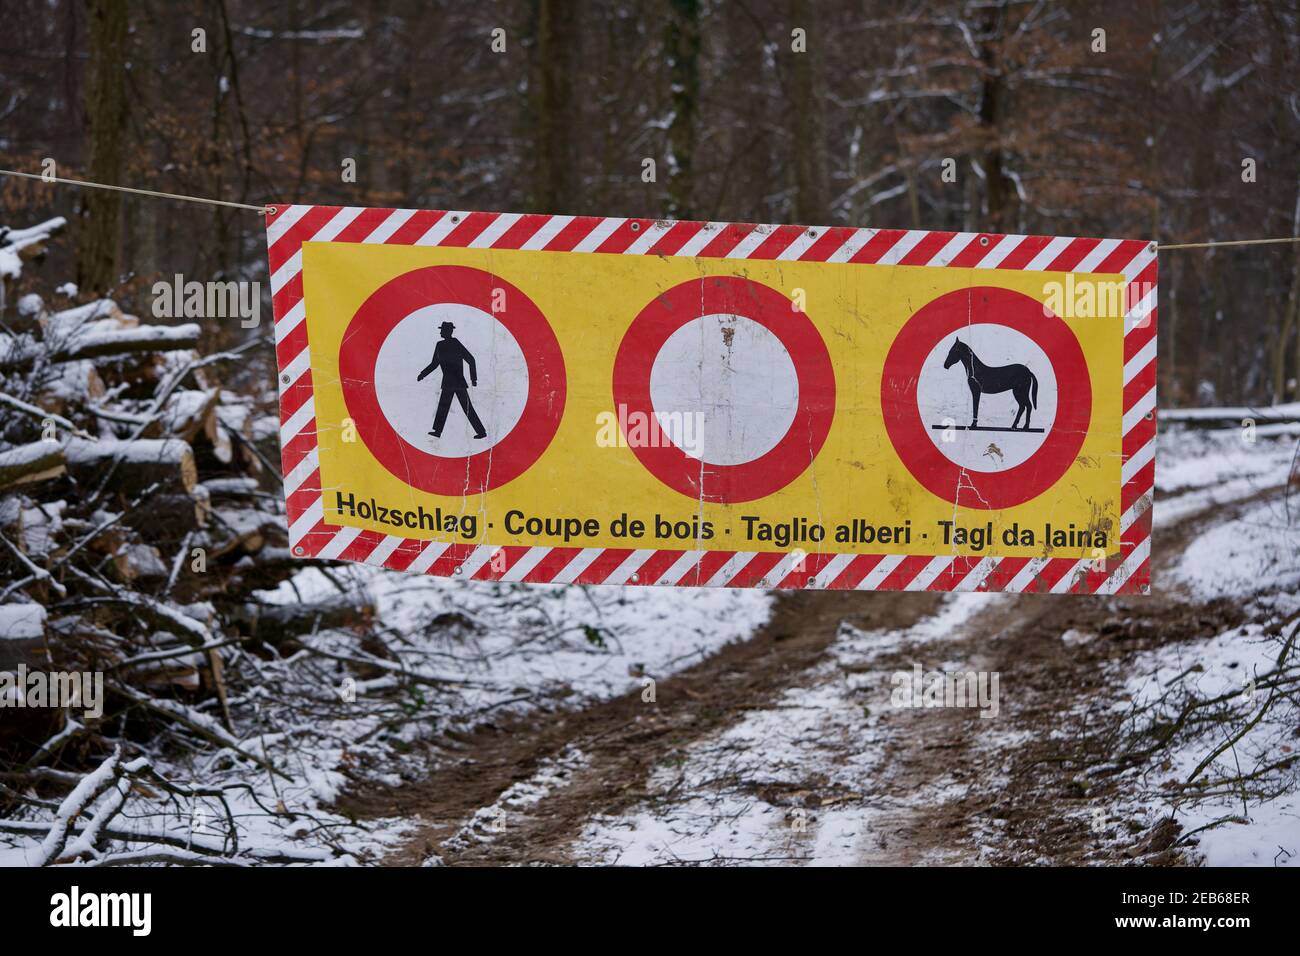 Closed path because of lumbering, Zurich, Switzerland, with warning banner lumbering. Translation of Holzschlag (German) ist lumbering. Stock Photo